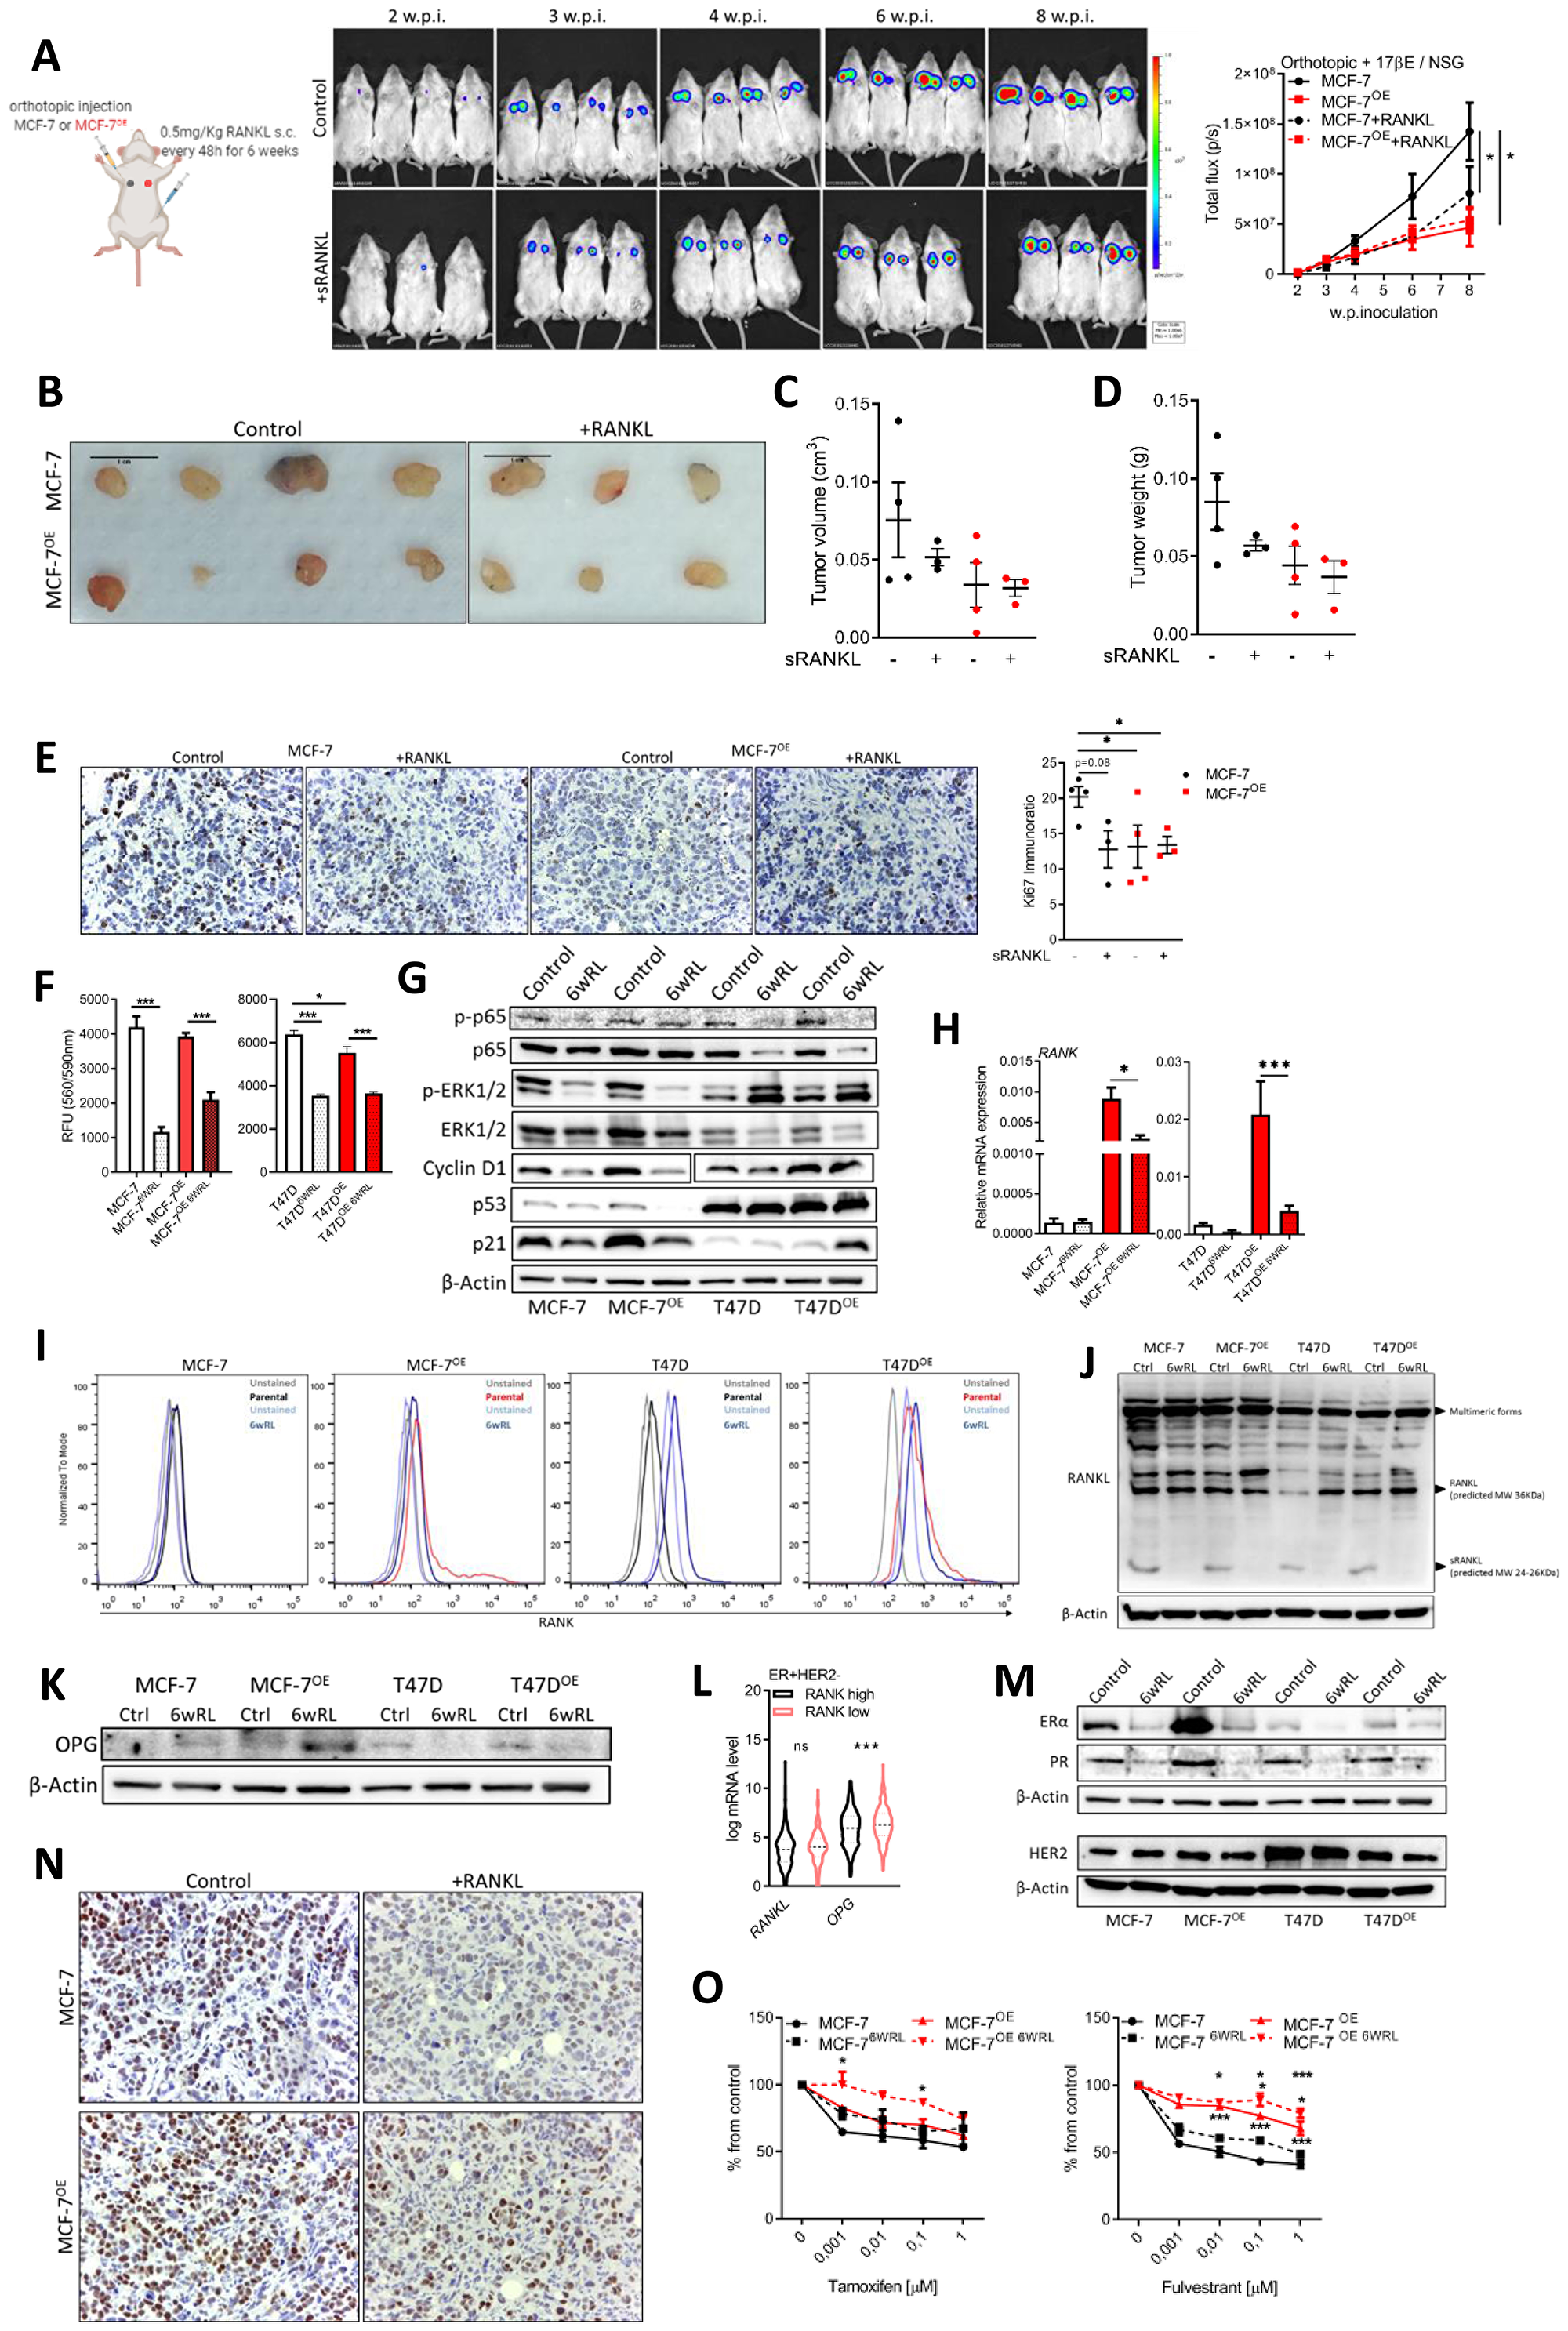 Continuous RANKL decreases cell proliferation and ER expression.